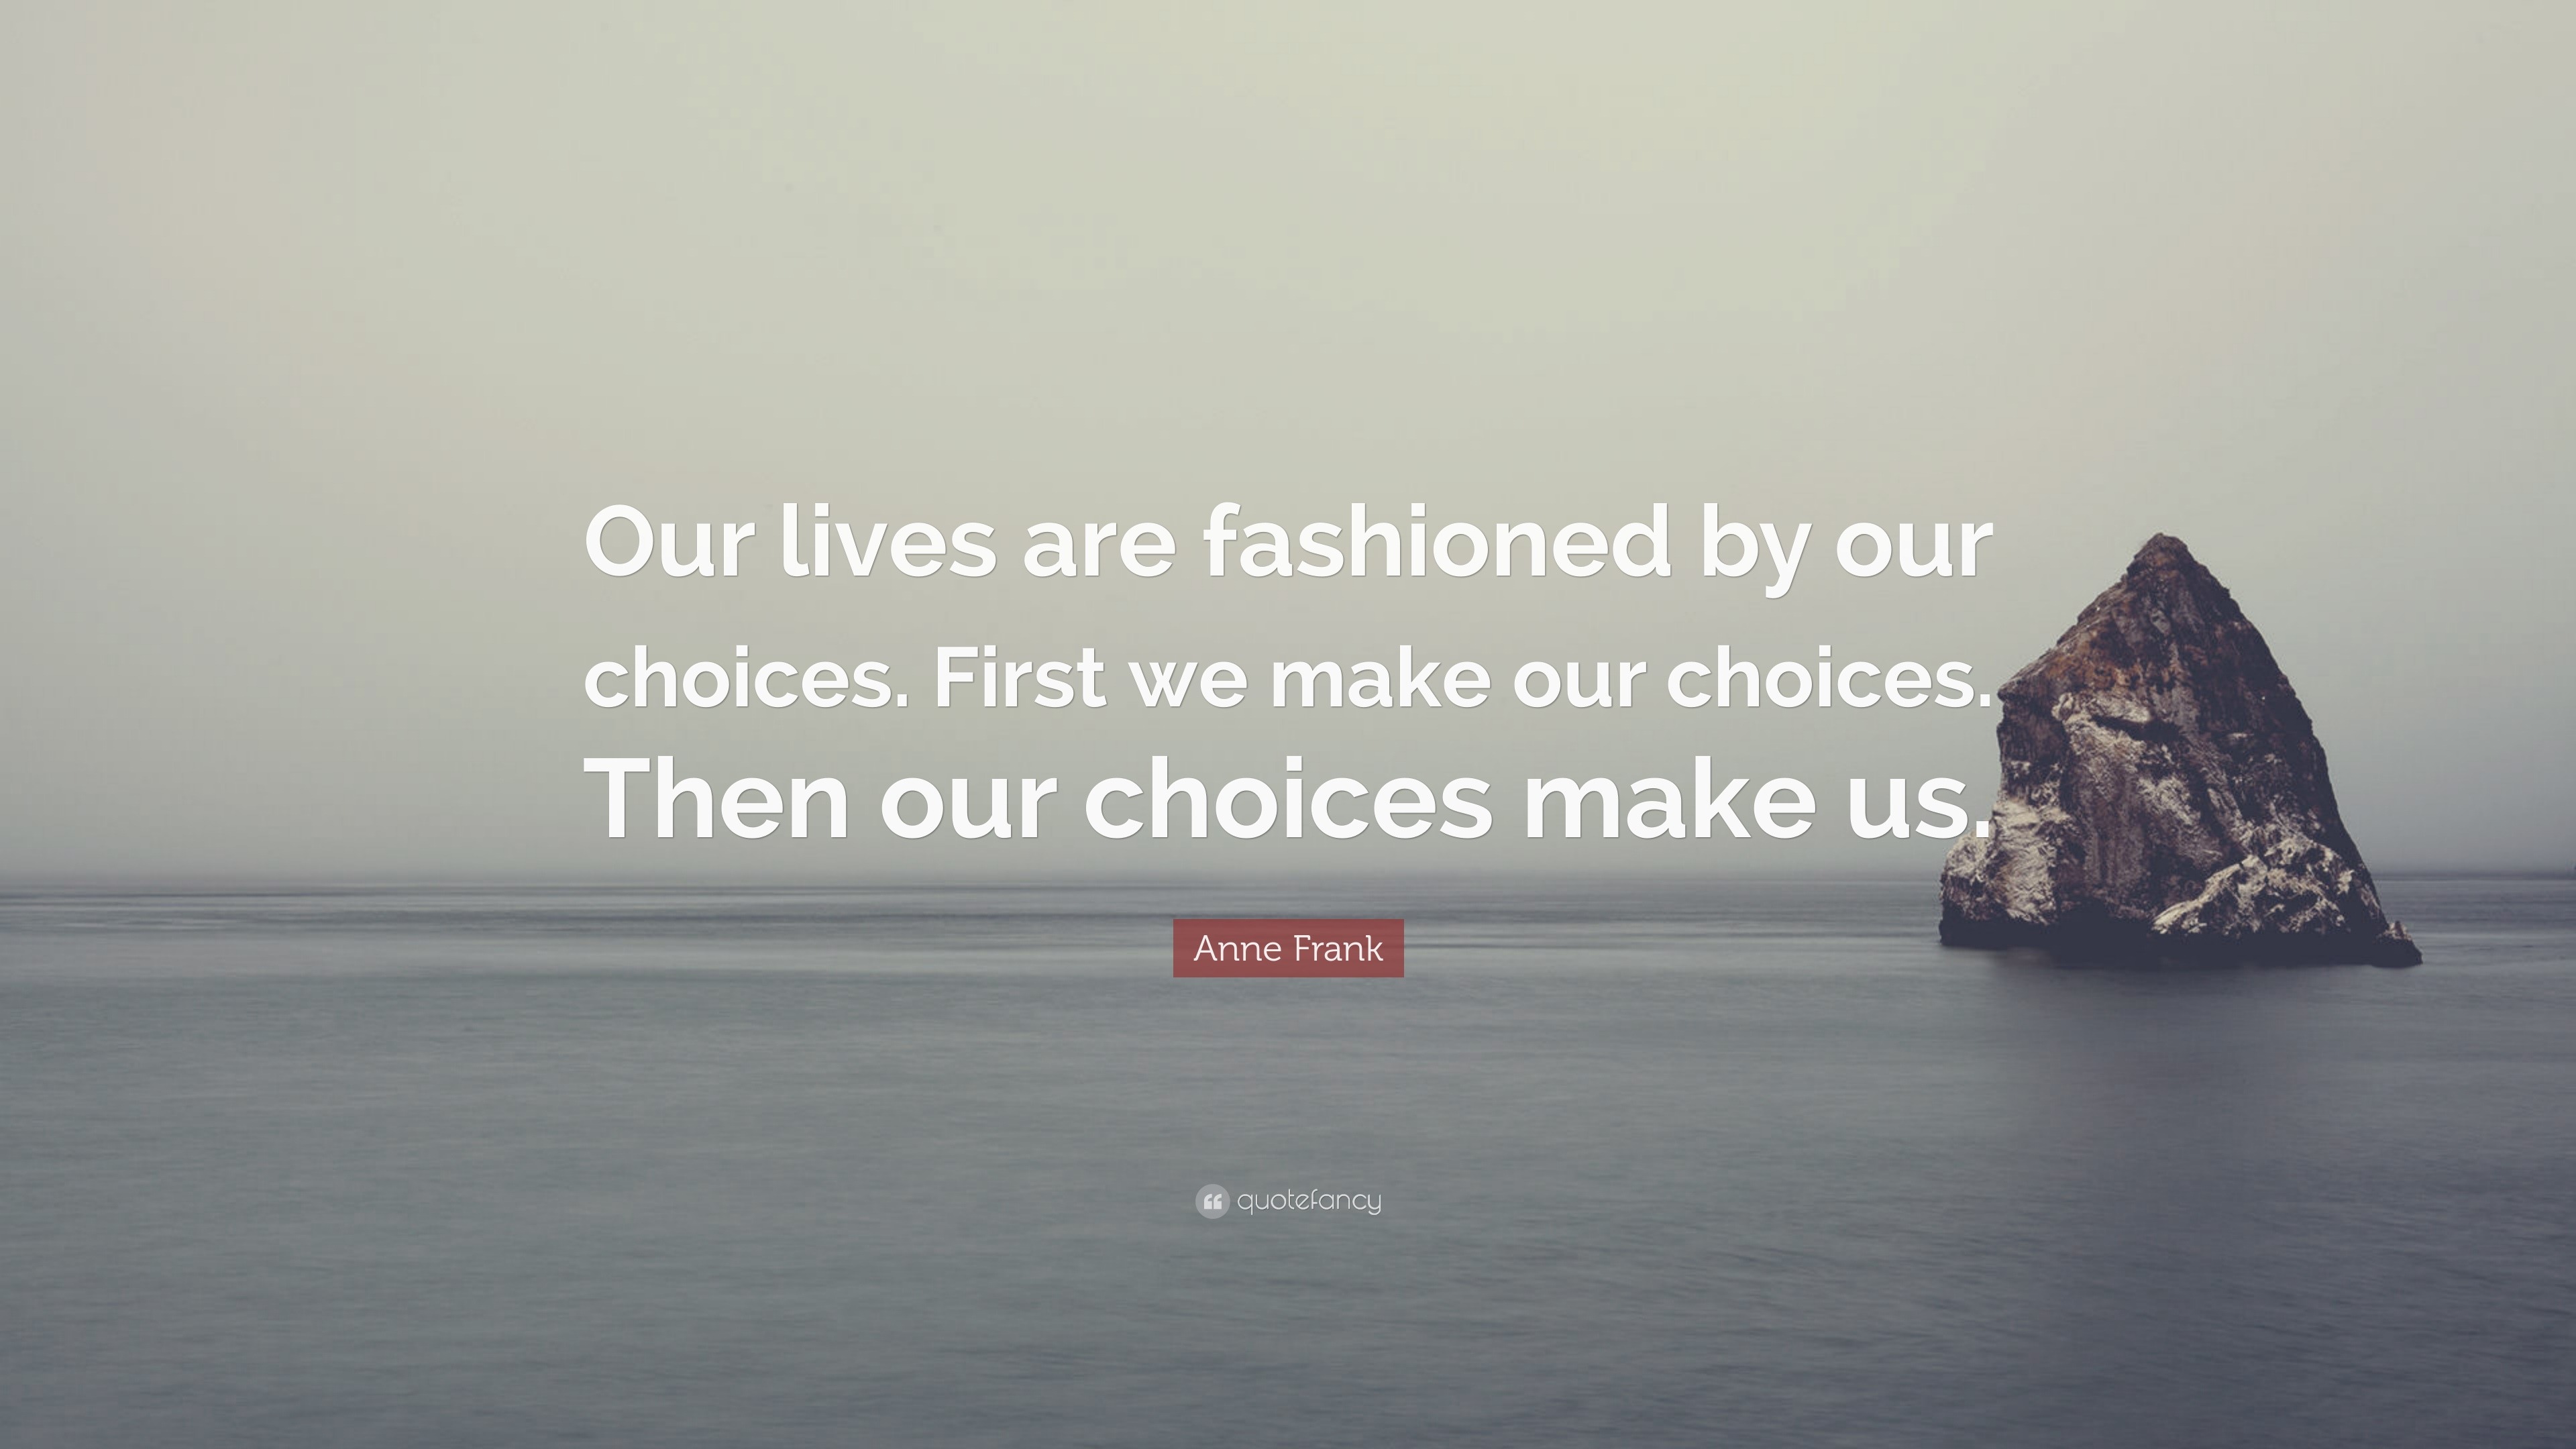 Anne Frank Quote: “Our lives are fashioned by our choices. First we